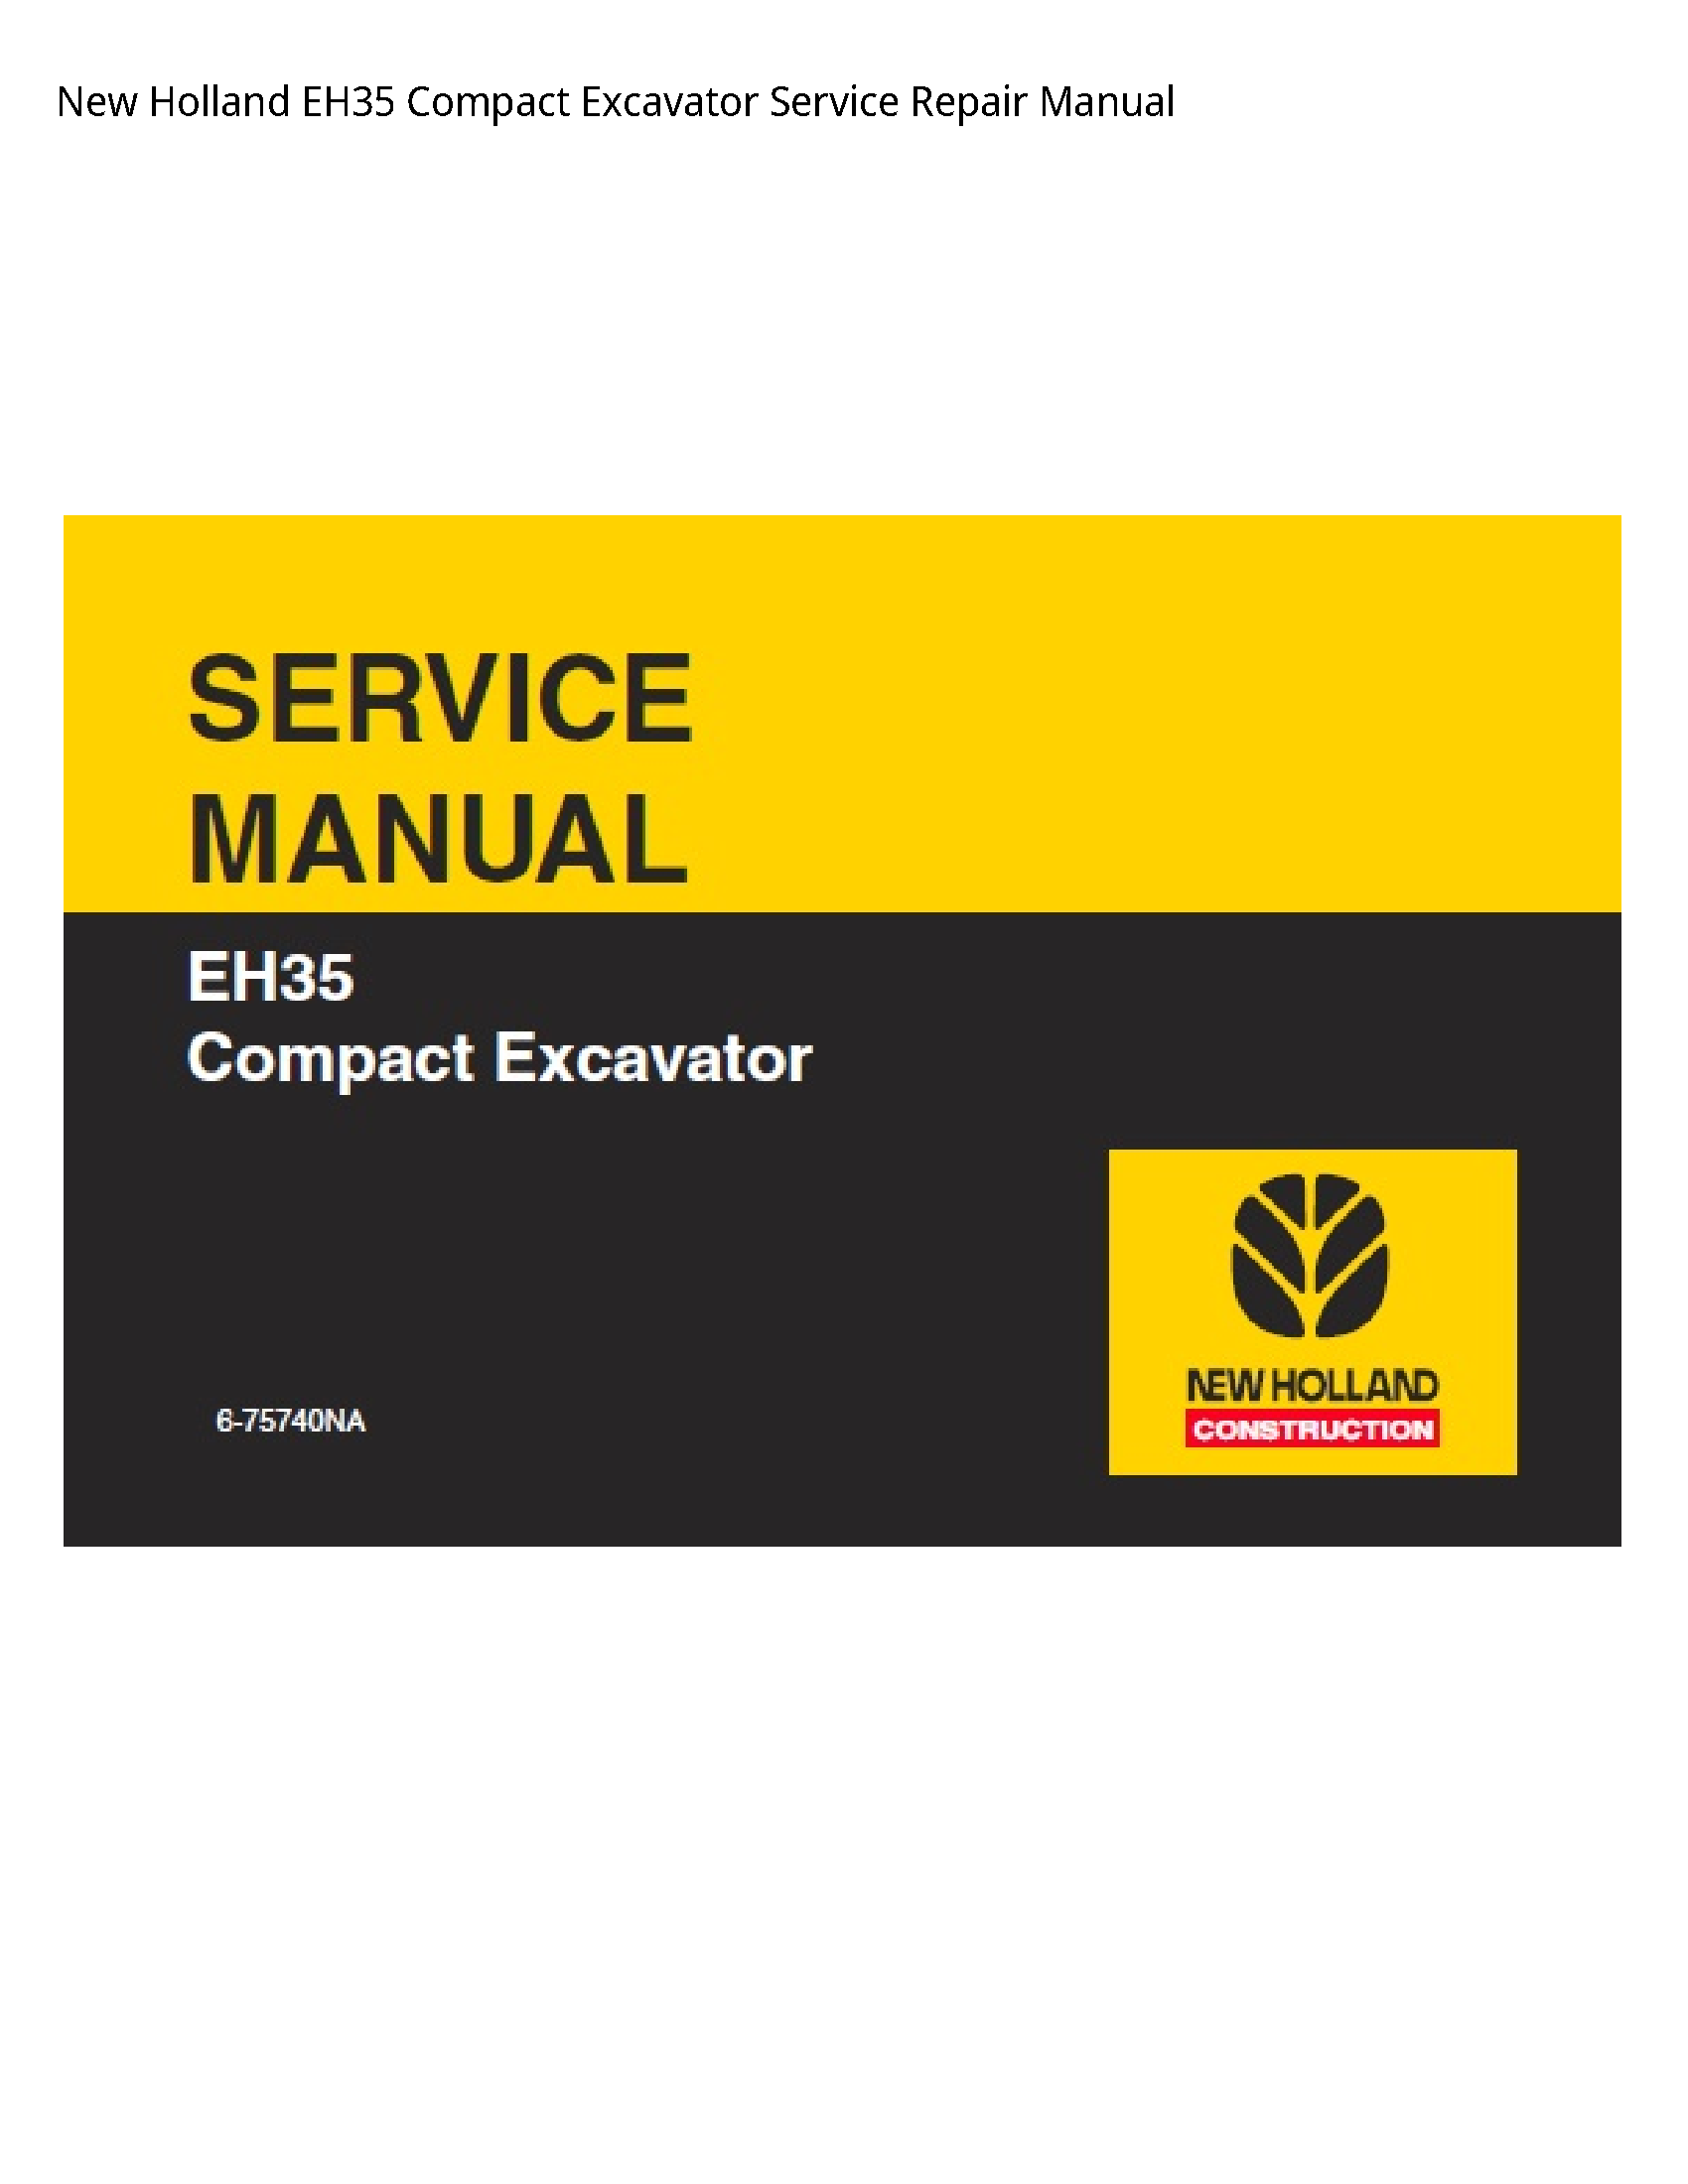 New Holland EH35 Compact Excavator manual